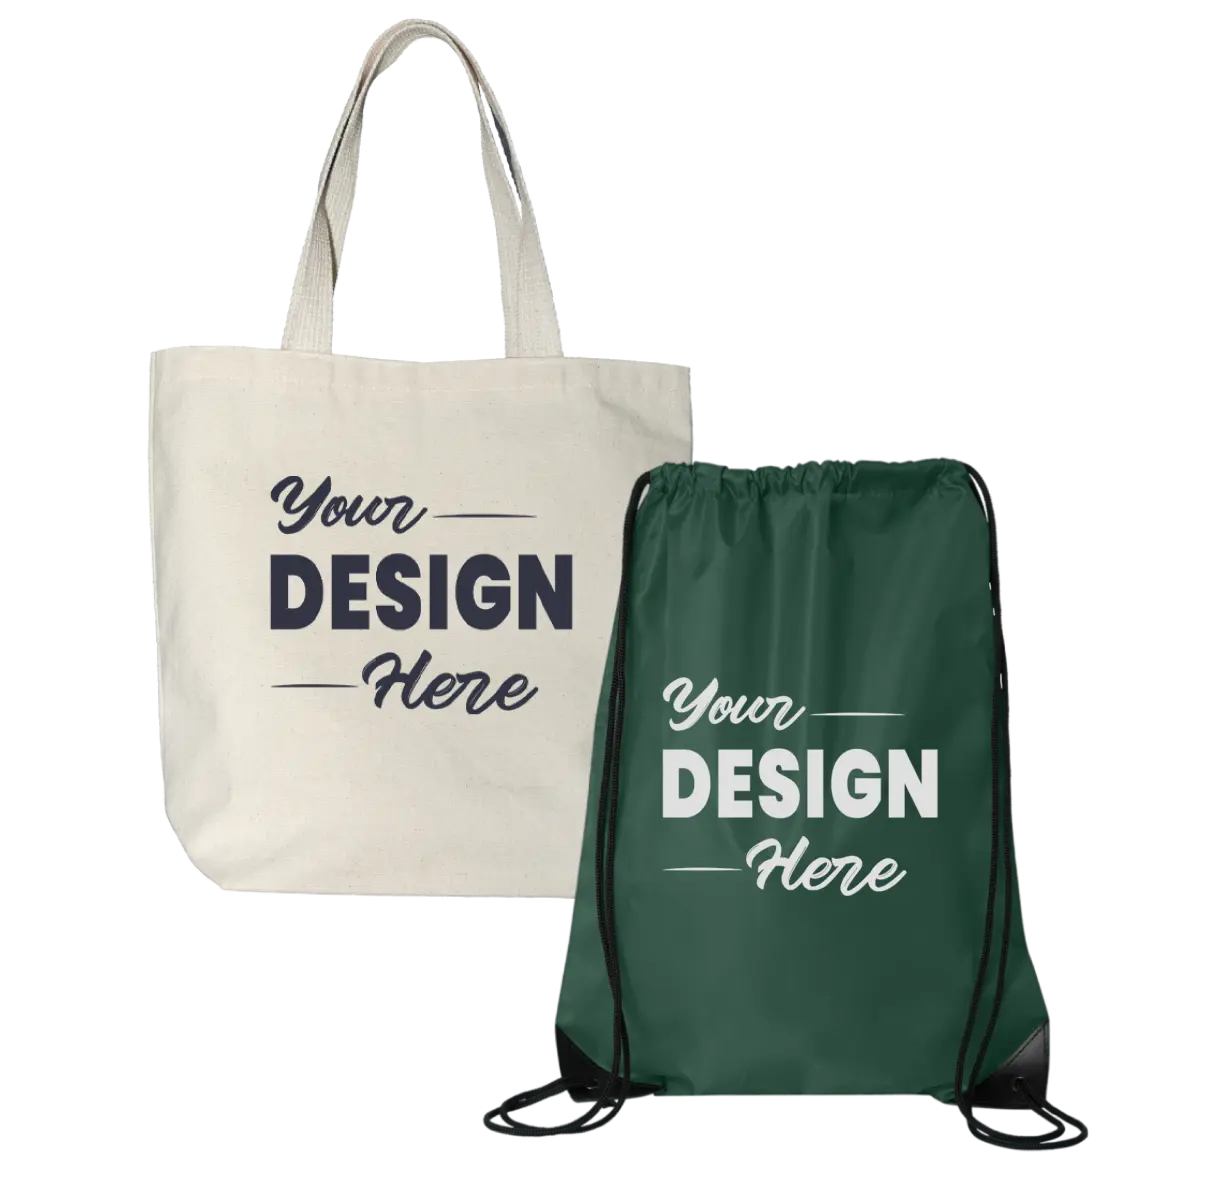 Beige and green totes